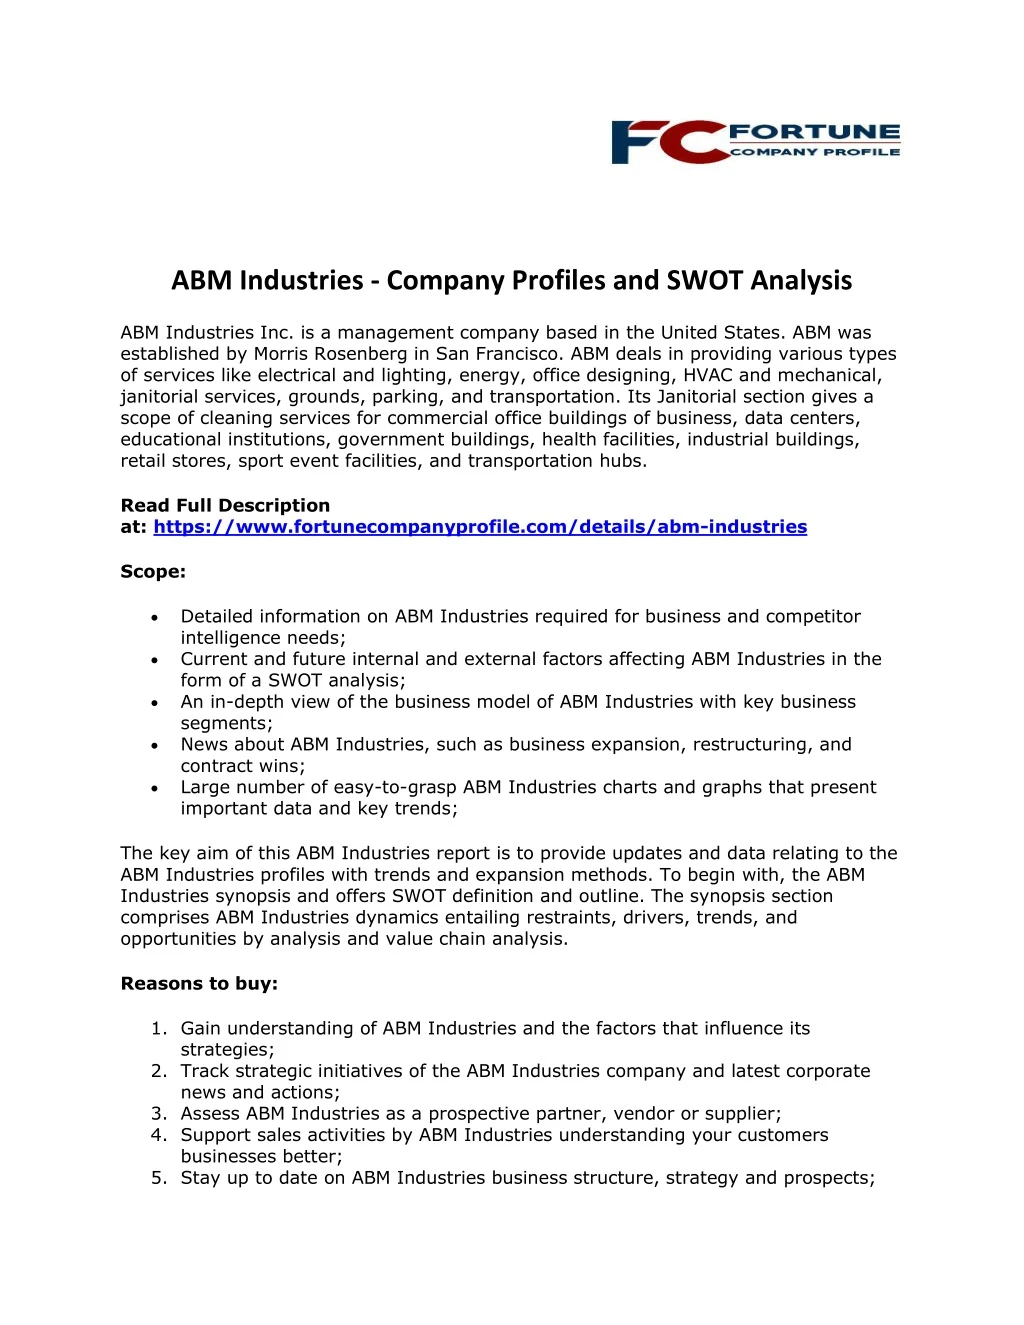 abm industries company profiles and swot analysis